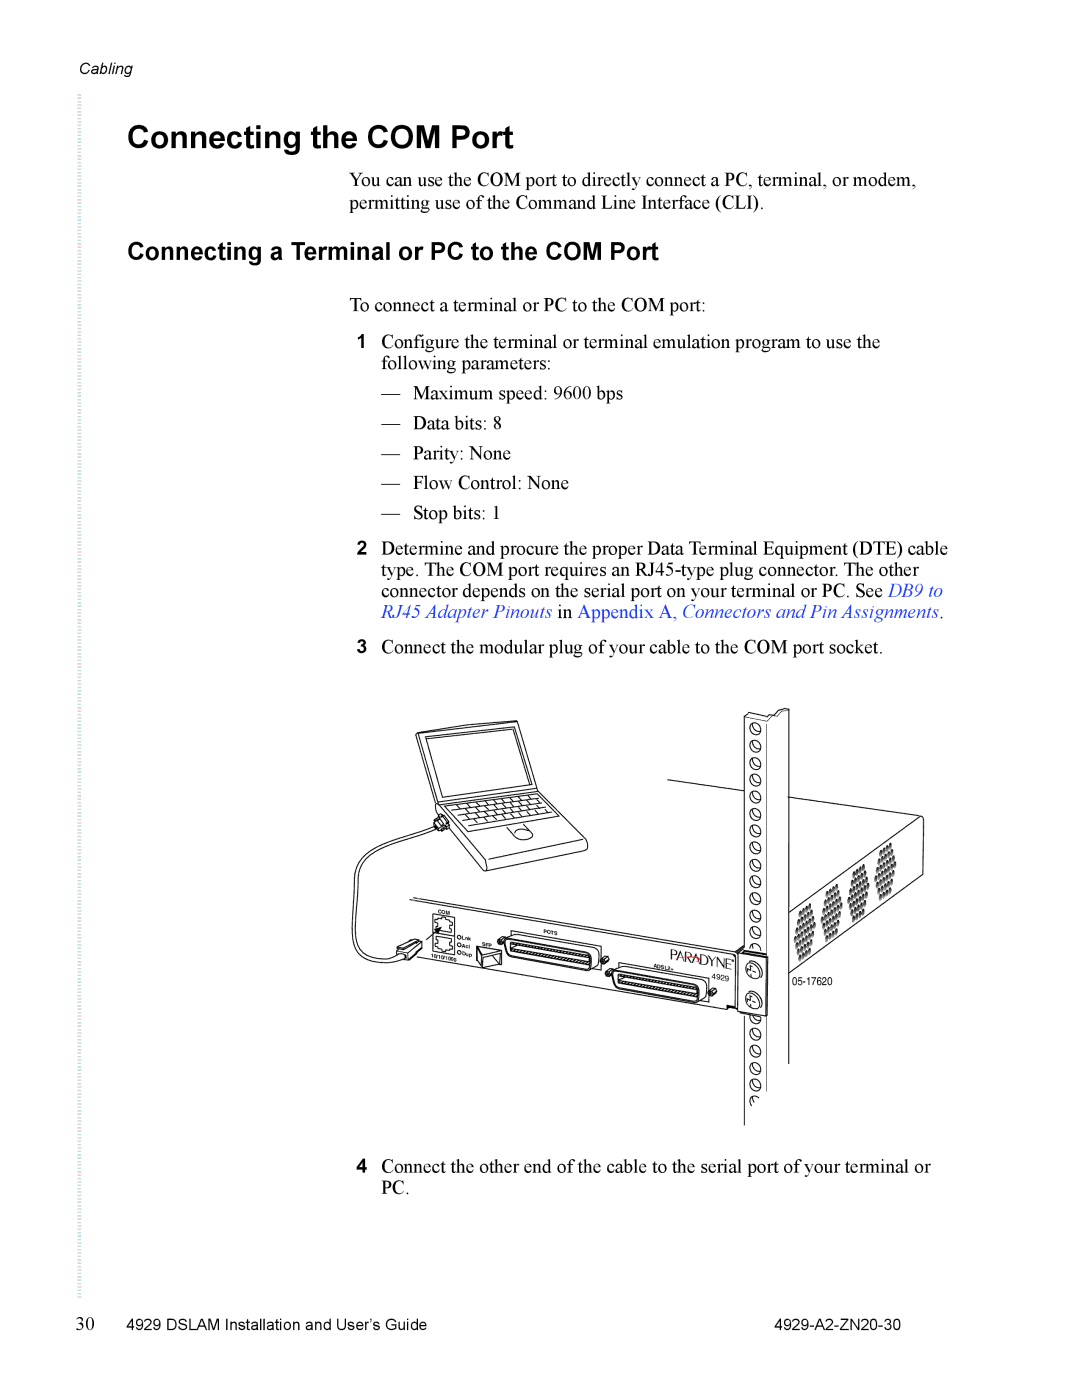 Zhone Technologies 4929 DSLAM manual Connecting the COM Port, Connecting a Terminal or PC to the COM Port 